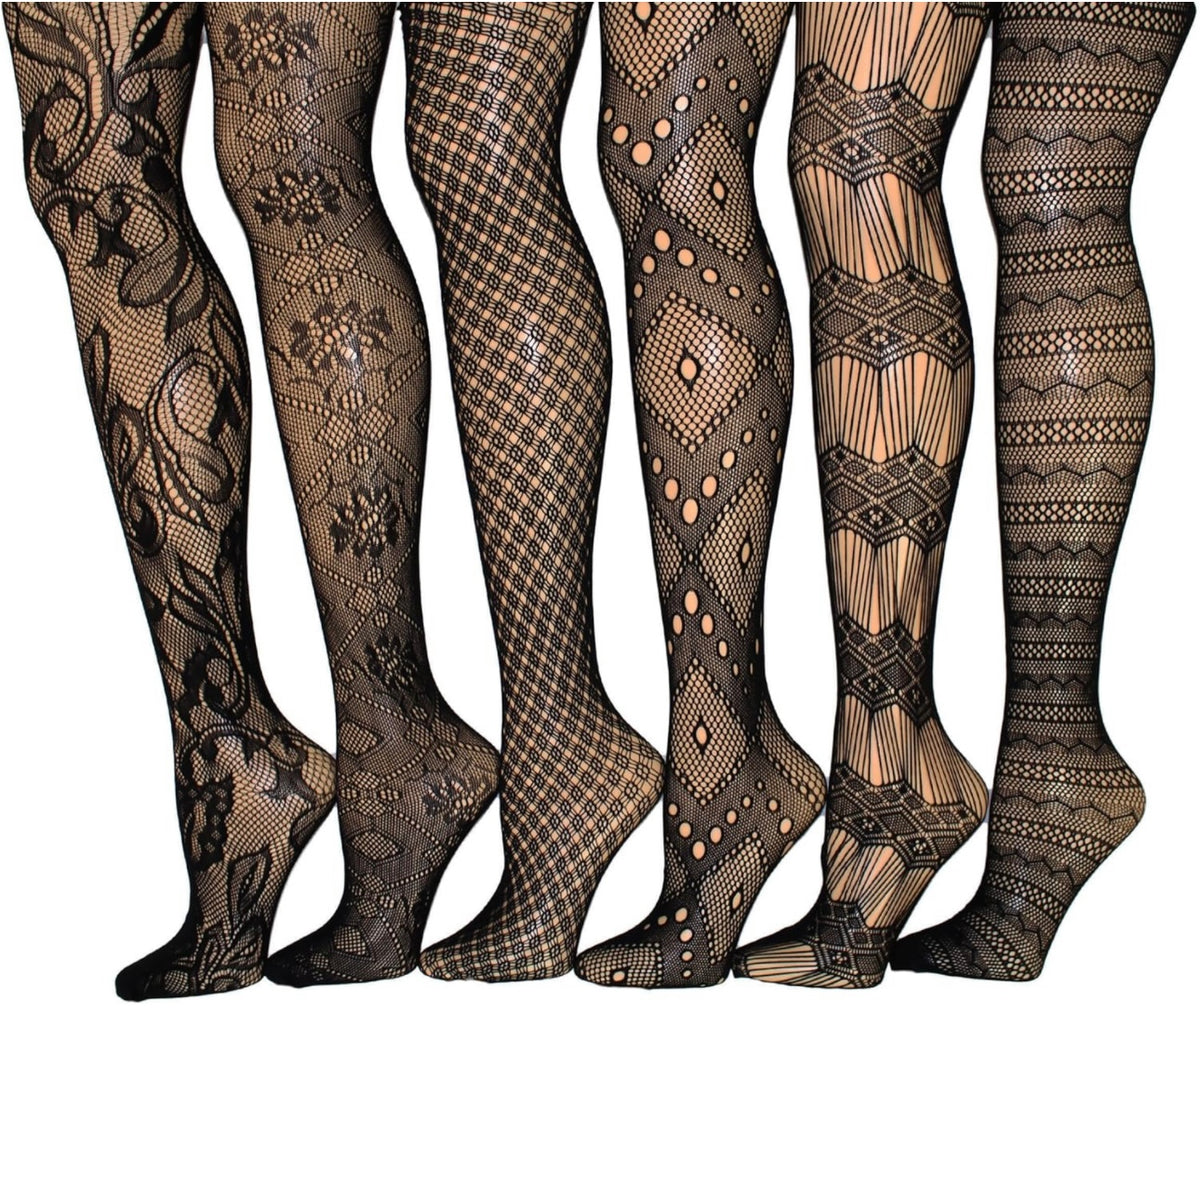 Fishnet Tights - Willow